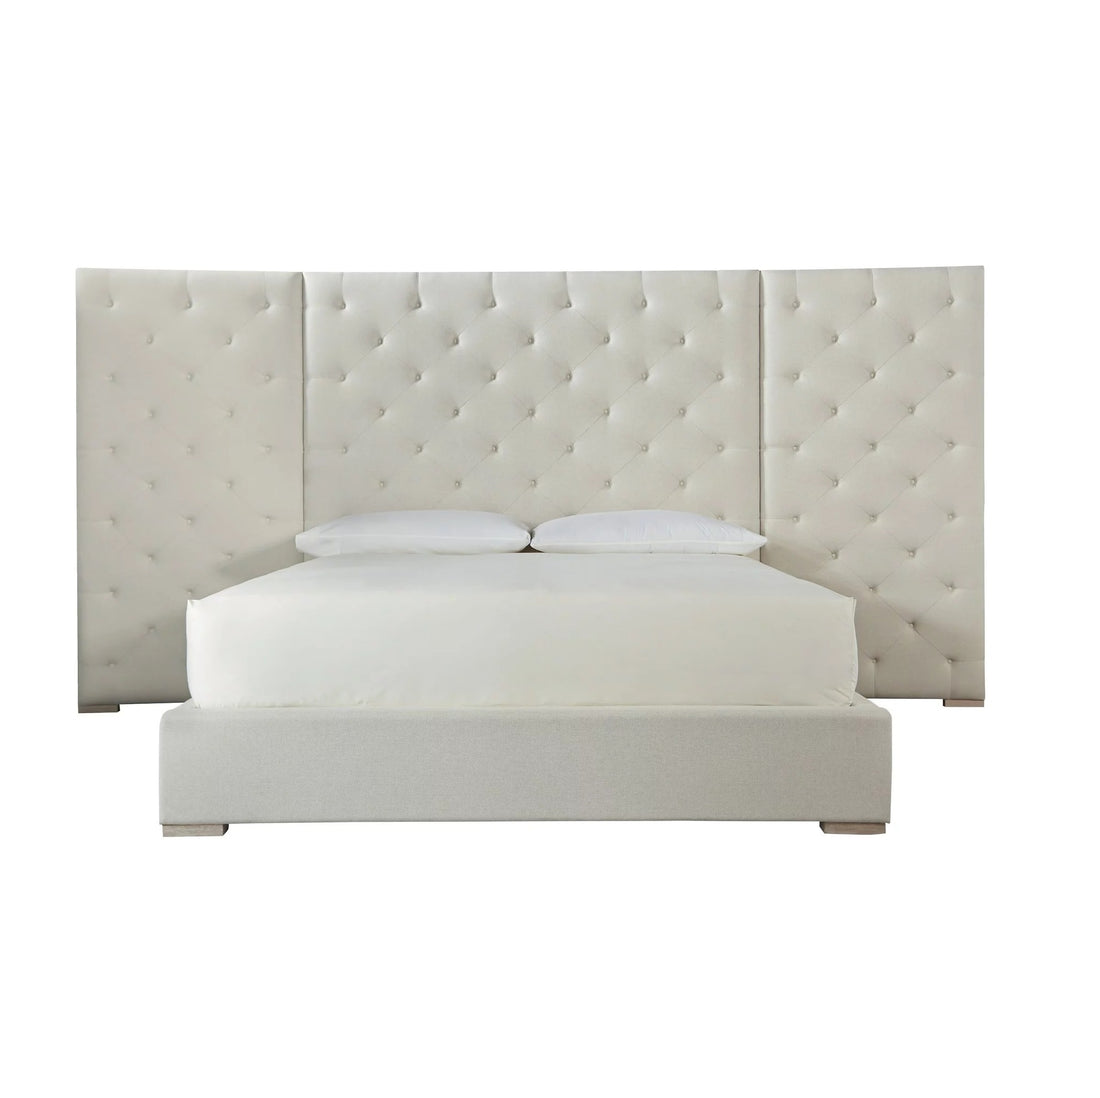 MODERN BRANDO KING BED WITH PANELS